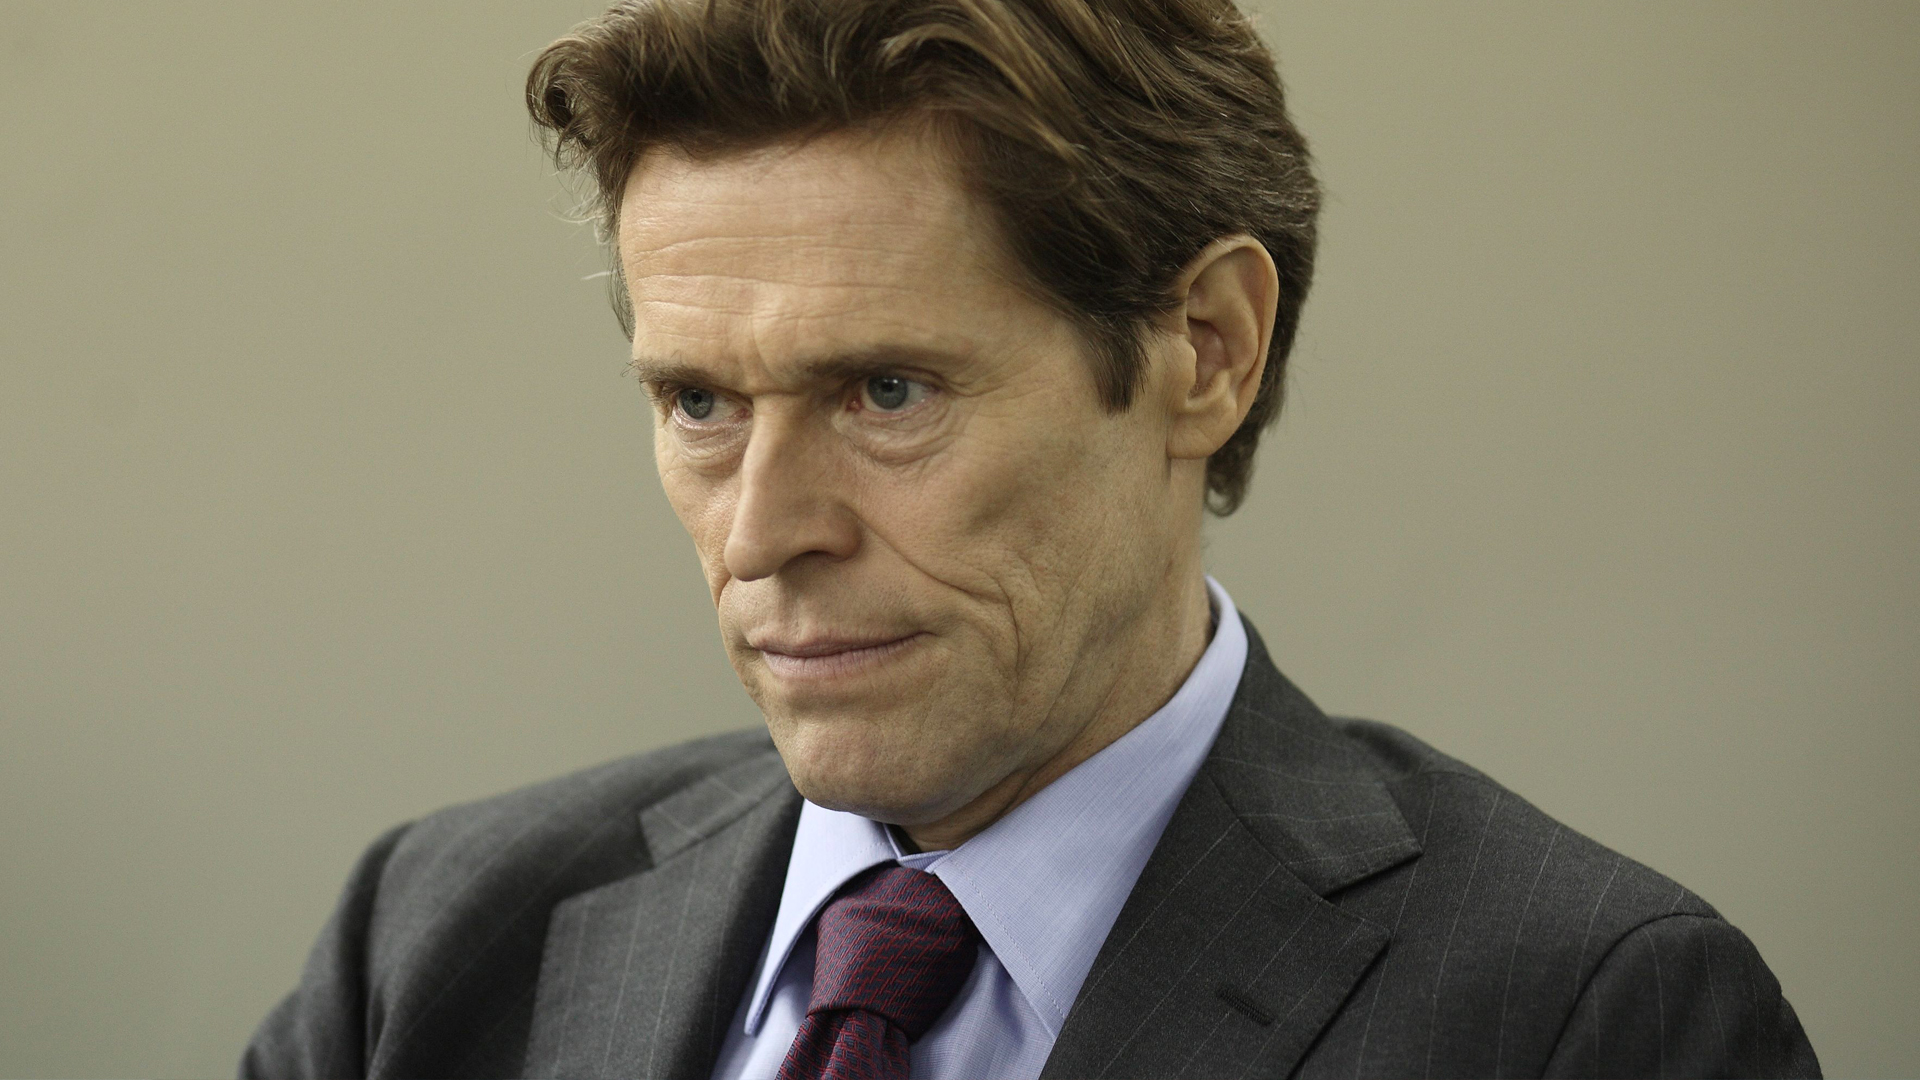 Info About Willem Dafoe's Mystery Role in JUSTICE LEAGUE.